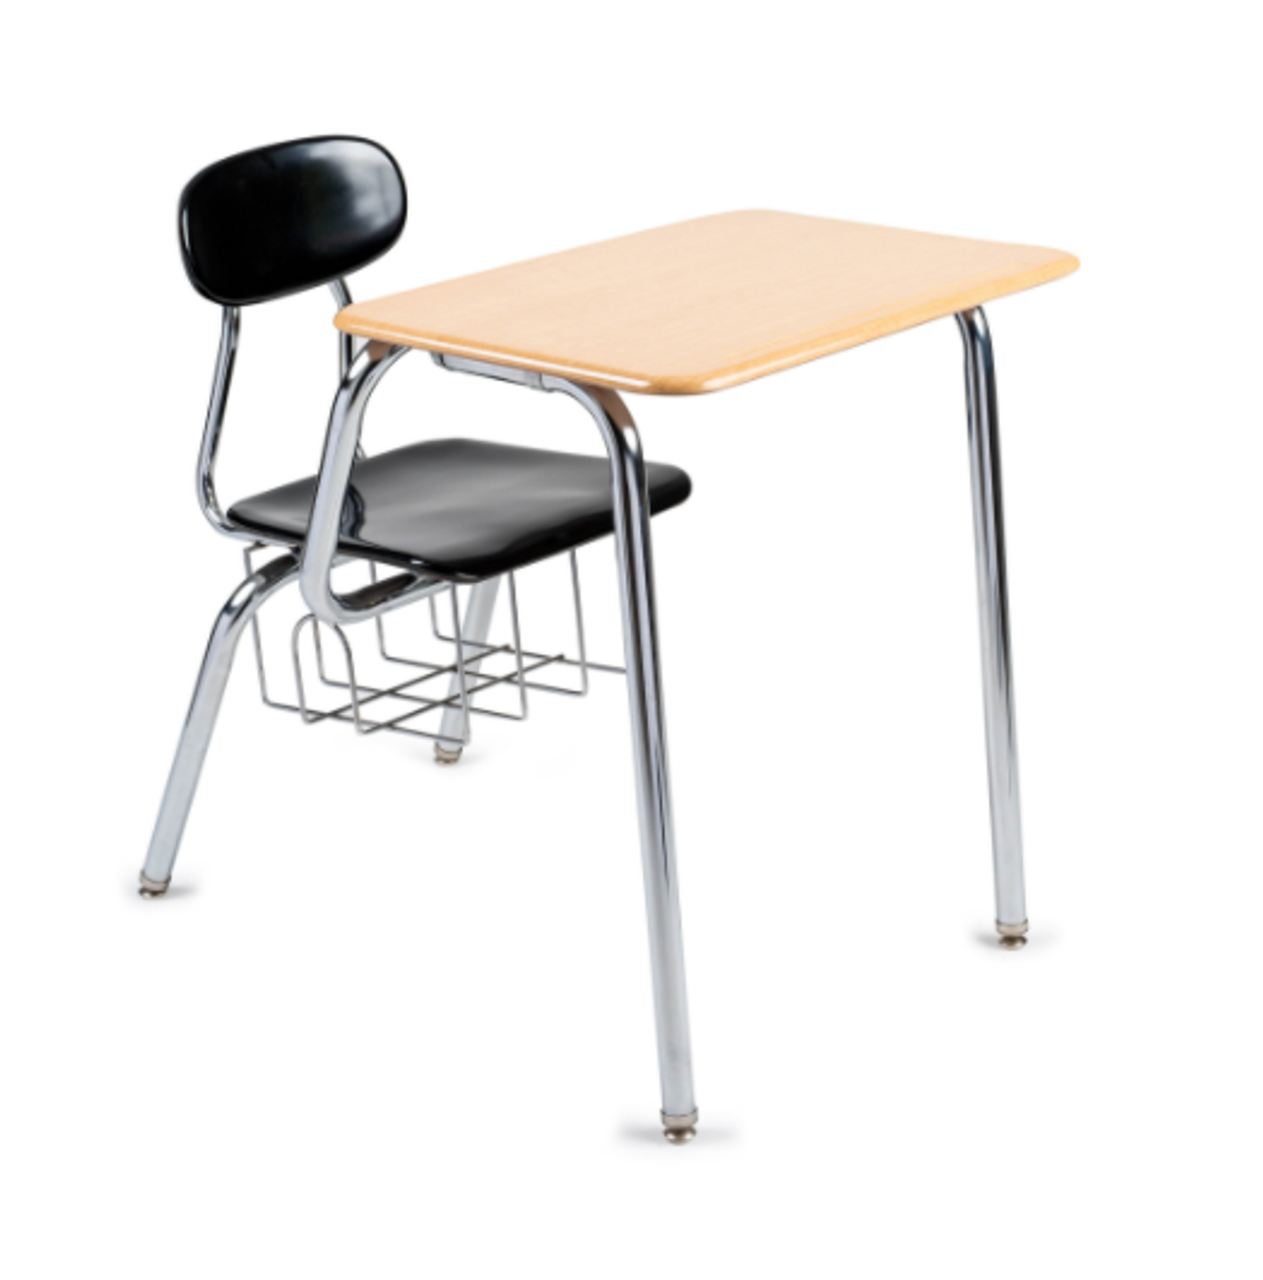 Scholar Craft SC687-SPBR Combo Desk Solid Plastic Top and Solid Plastic Chair with 17.5 inch Seat Height and Book Rack